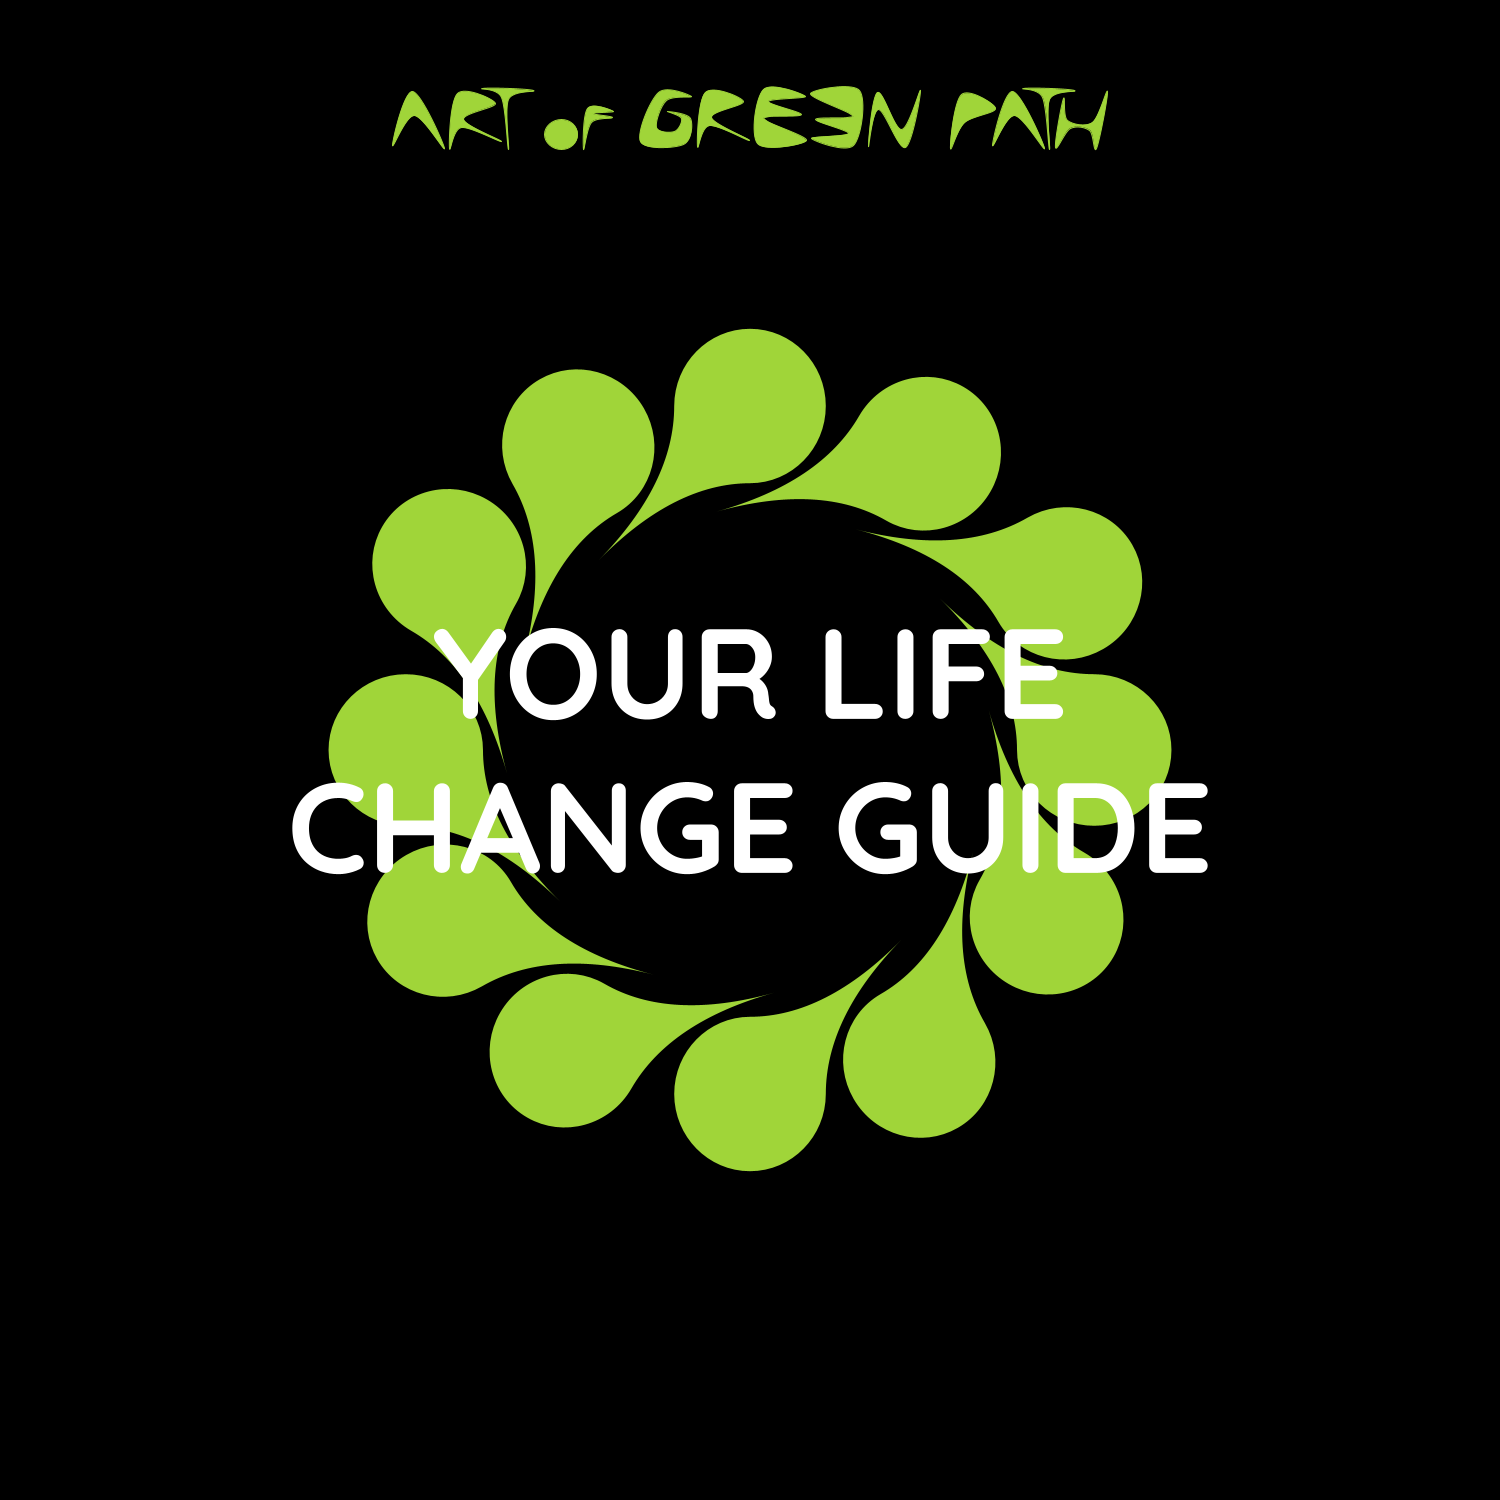 YOUR LIFE CHANGE GUIDE by Art Of Green Path